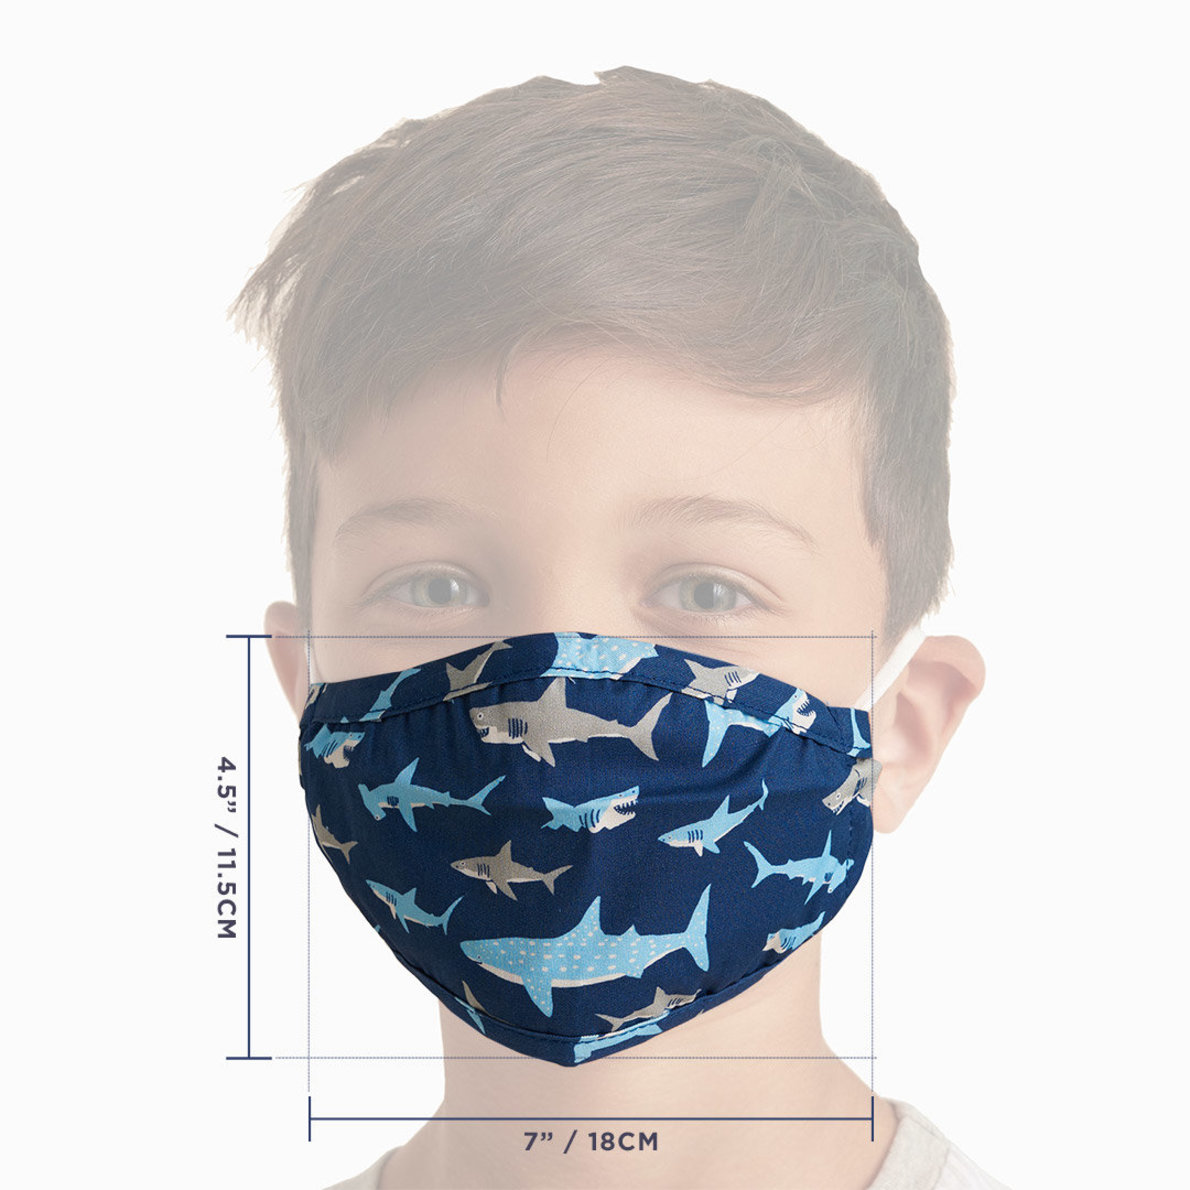 View larger image of Non-Medical Reusable Toddler Face Mask - Shark Frenzy